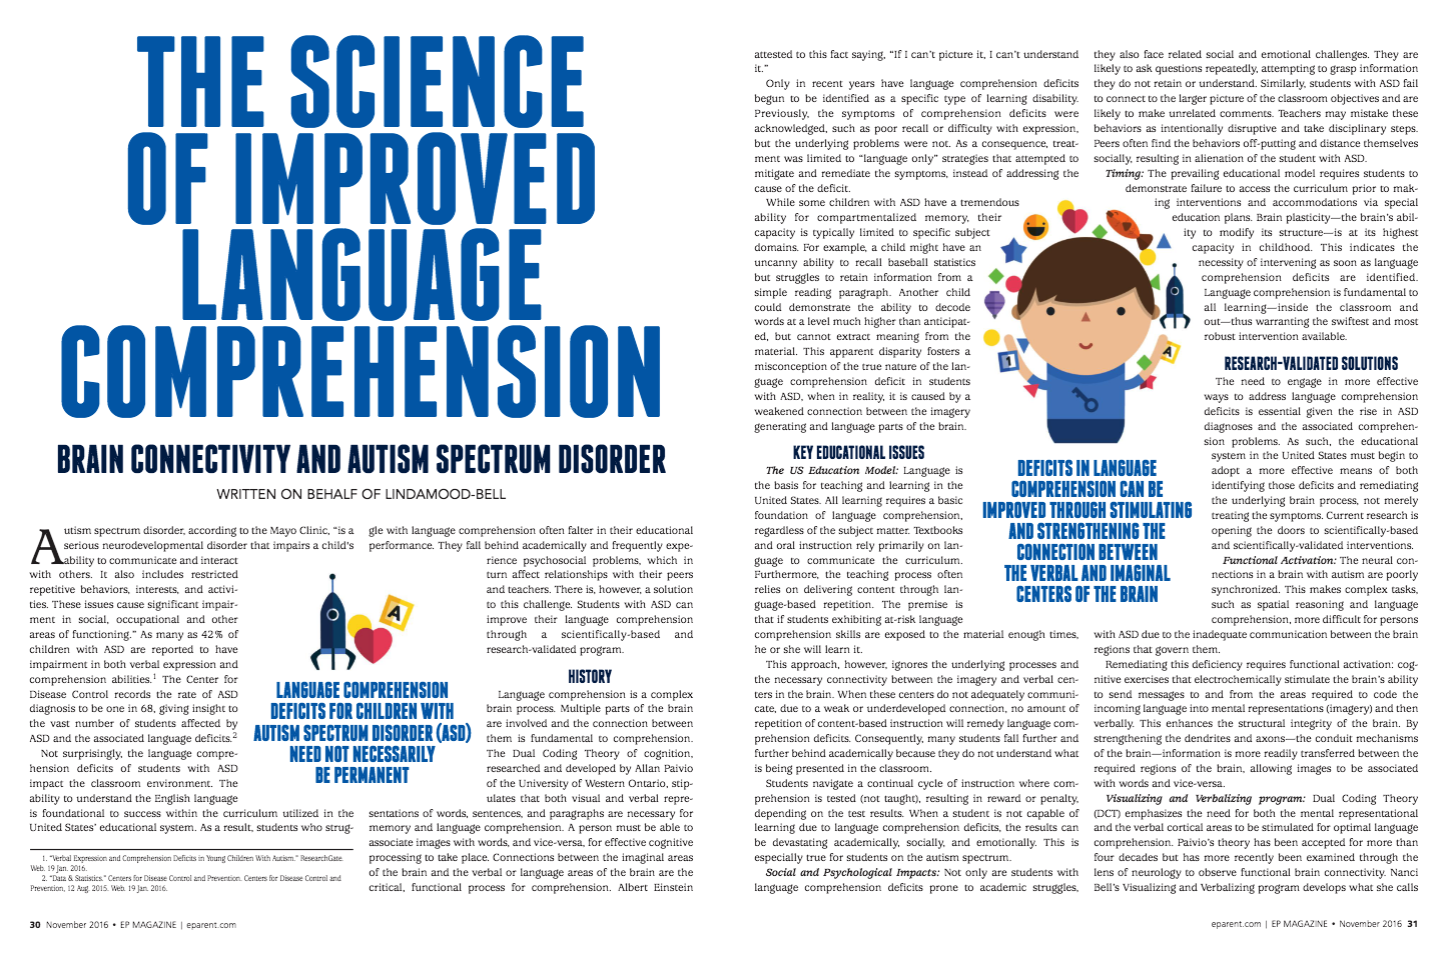 The science of improved language comprehension